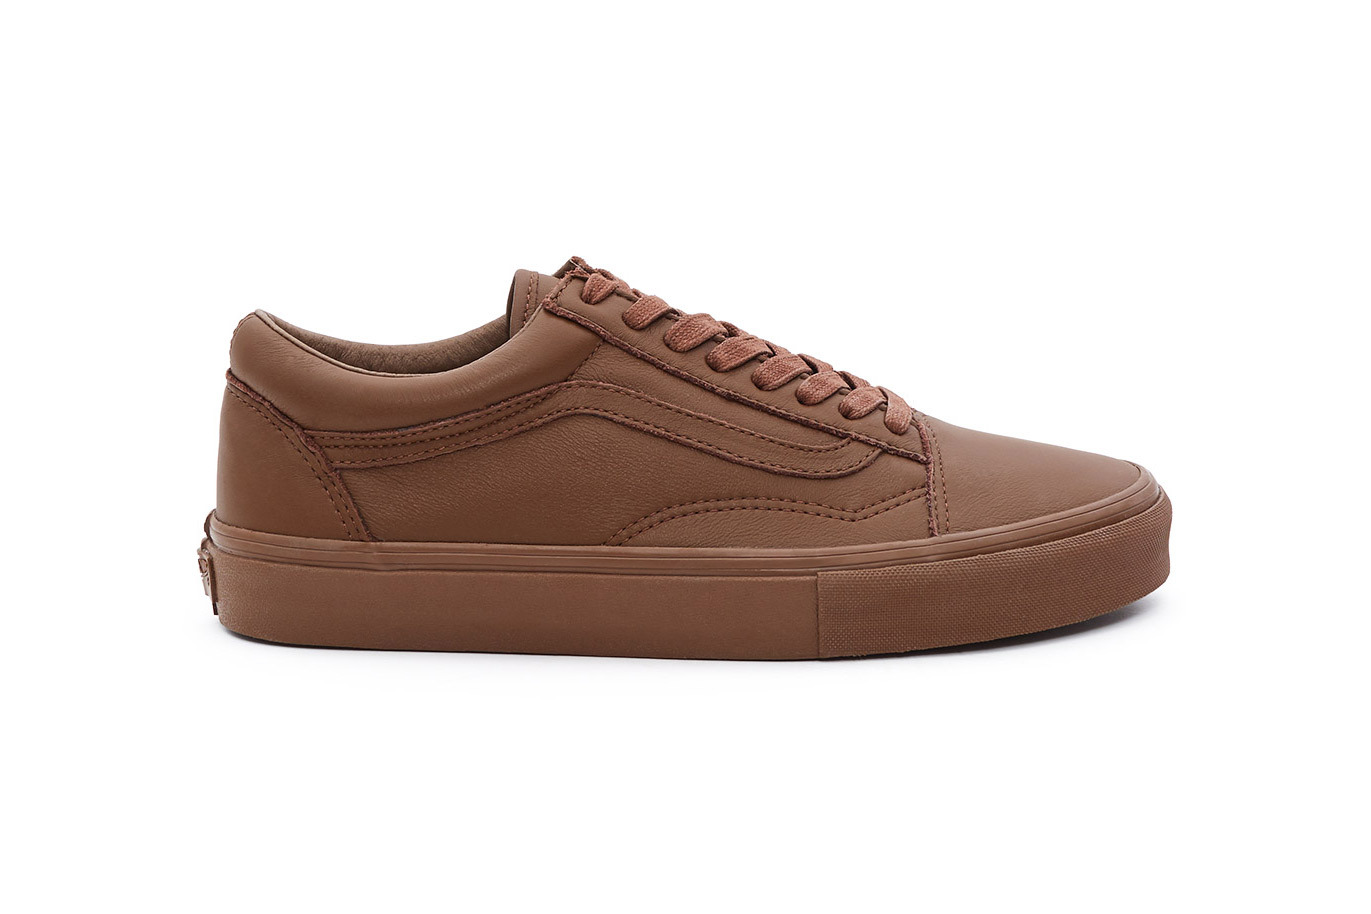 opening-ceremony-vans-leather-mono-pack-4